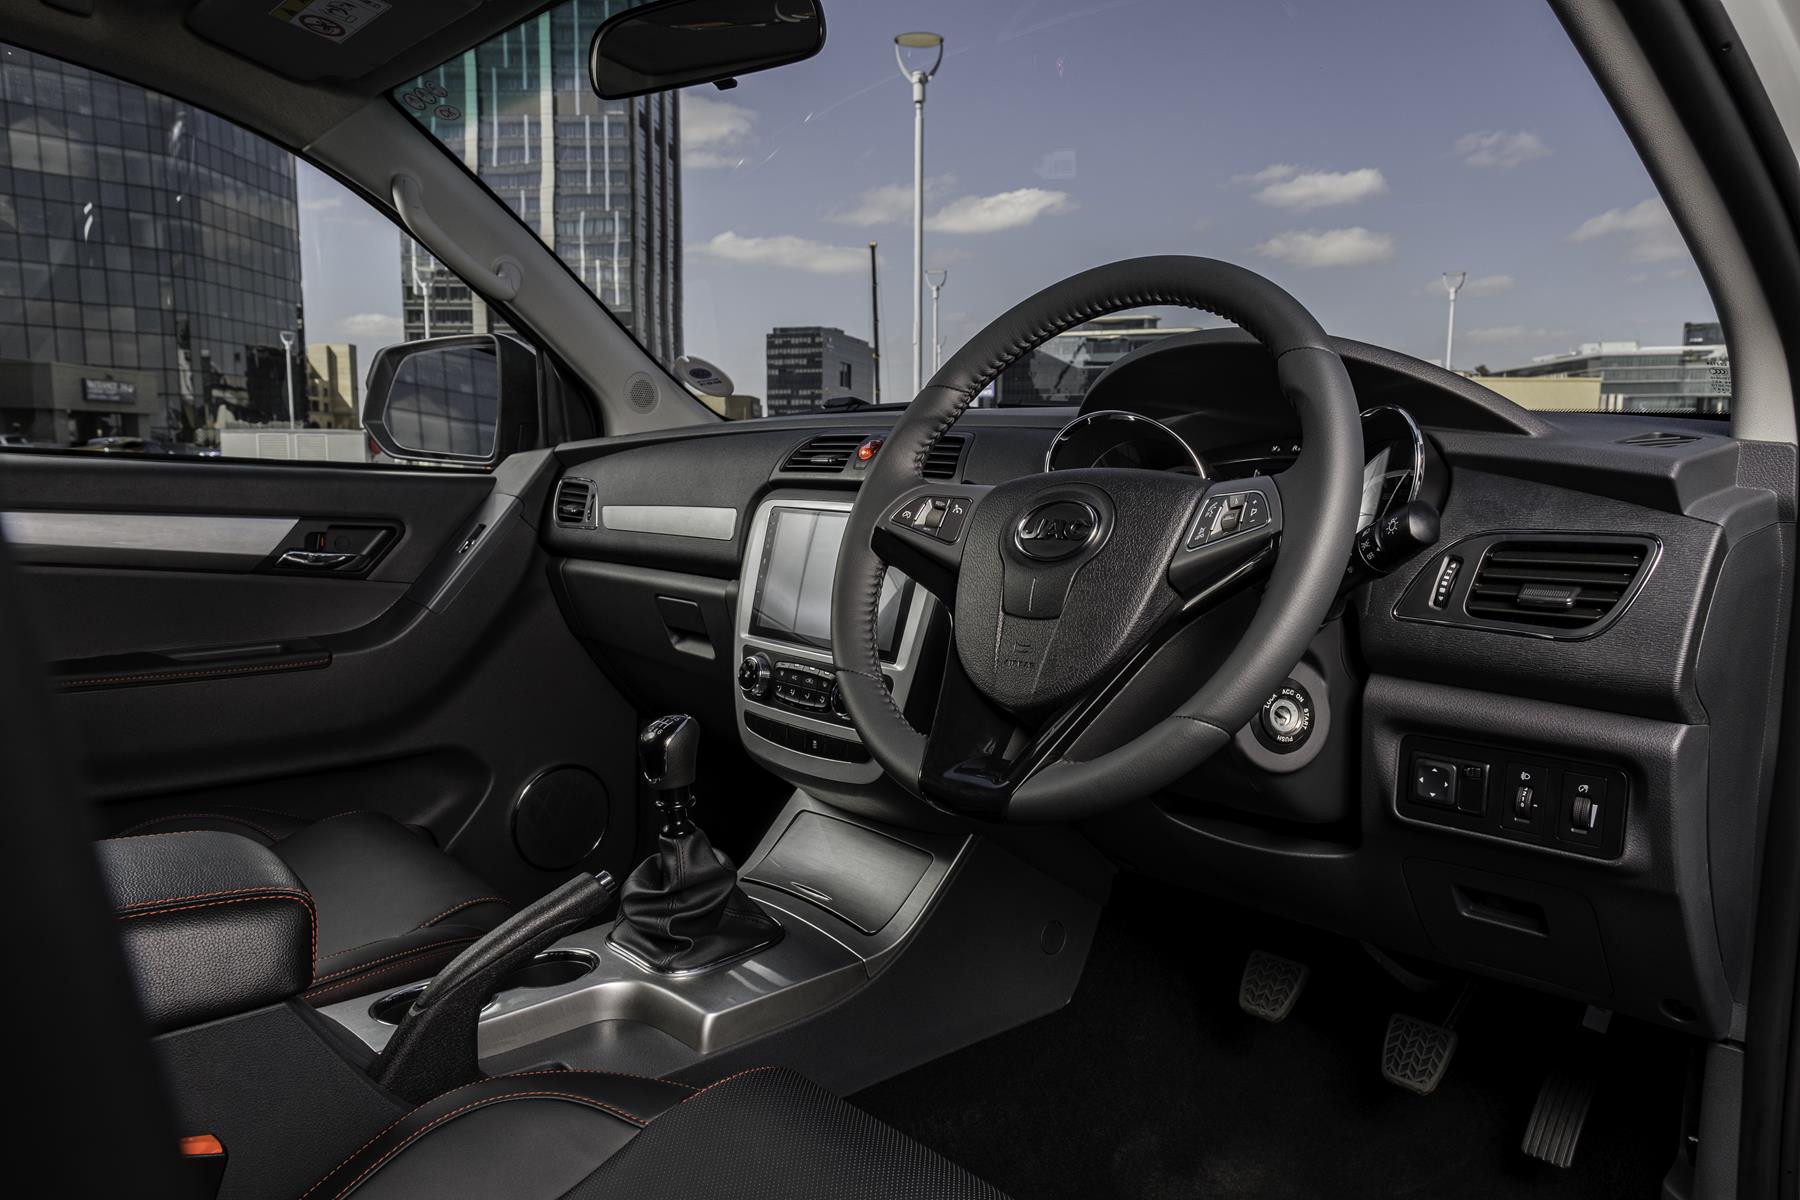 Driver's side interior view of the JAC Motors T8 double-cab